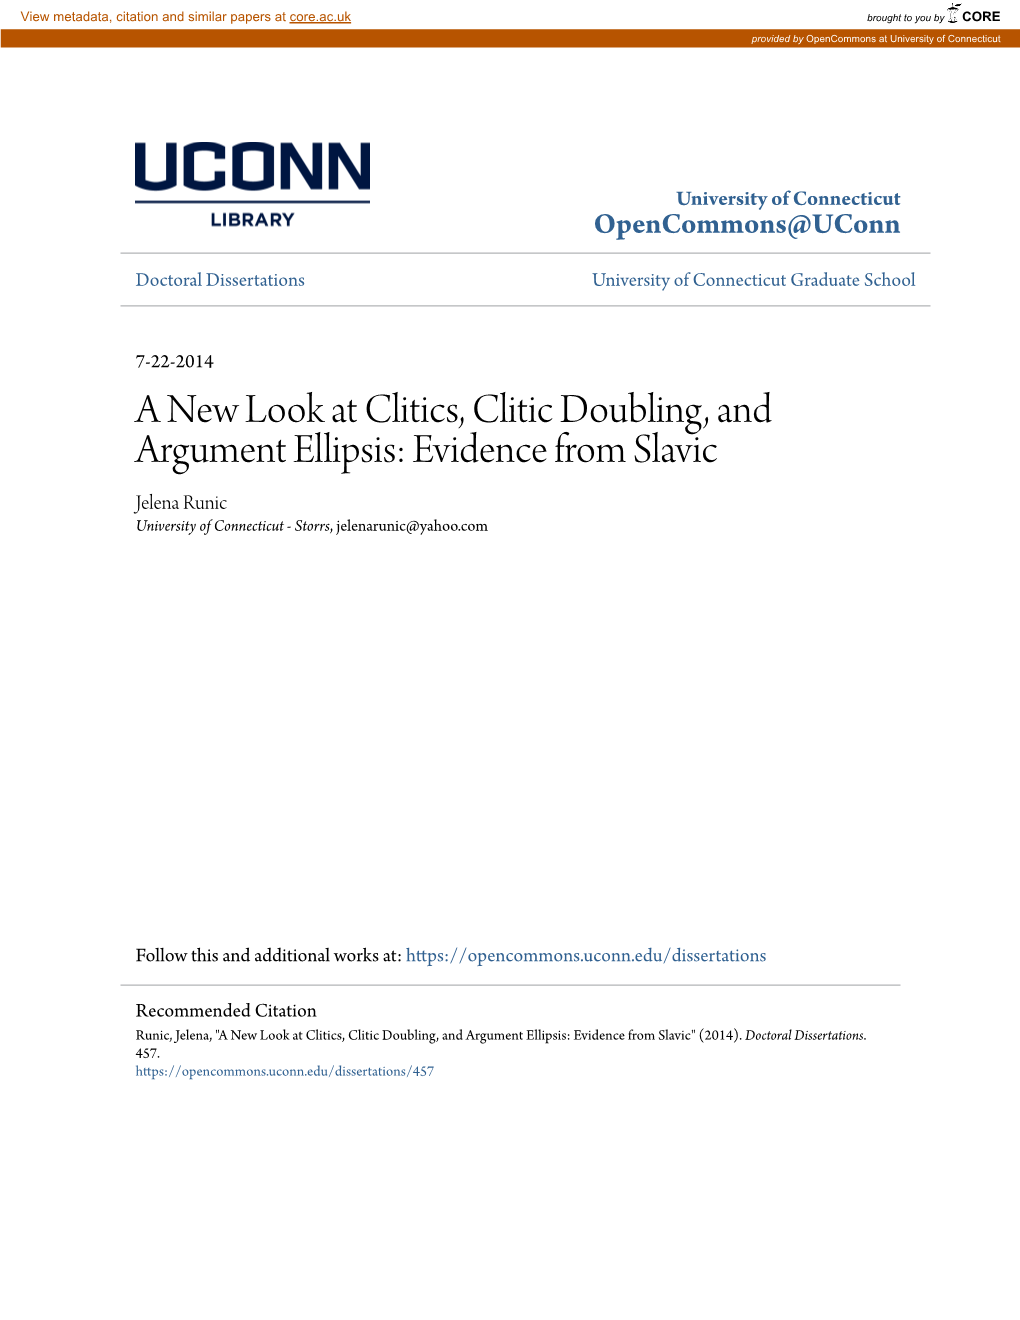 A New Look at Clitics, Clitic Doubling, and Argument Ellipsis: Evidence from Slavic Jelena Runic University of Connecticut - Storrs, Jelenarunic@Yahoo.Com